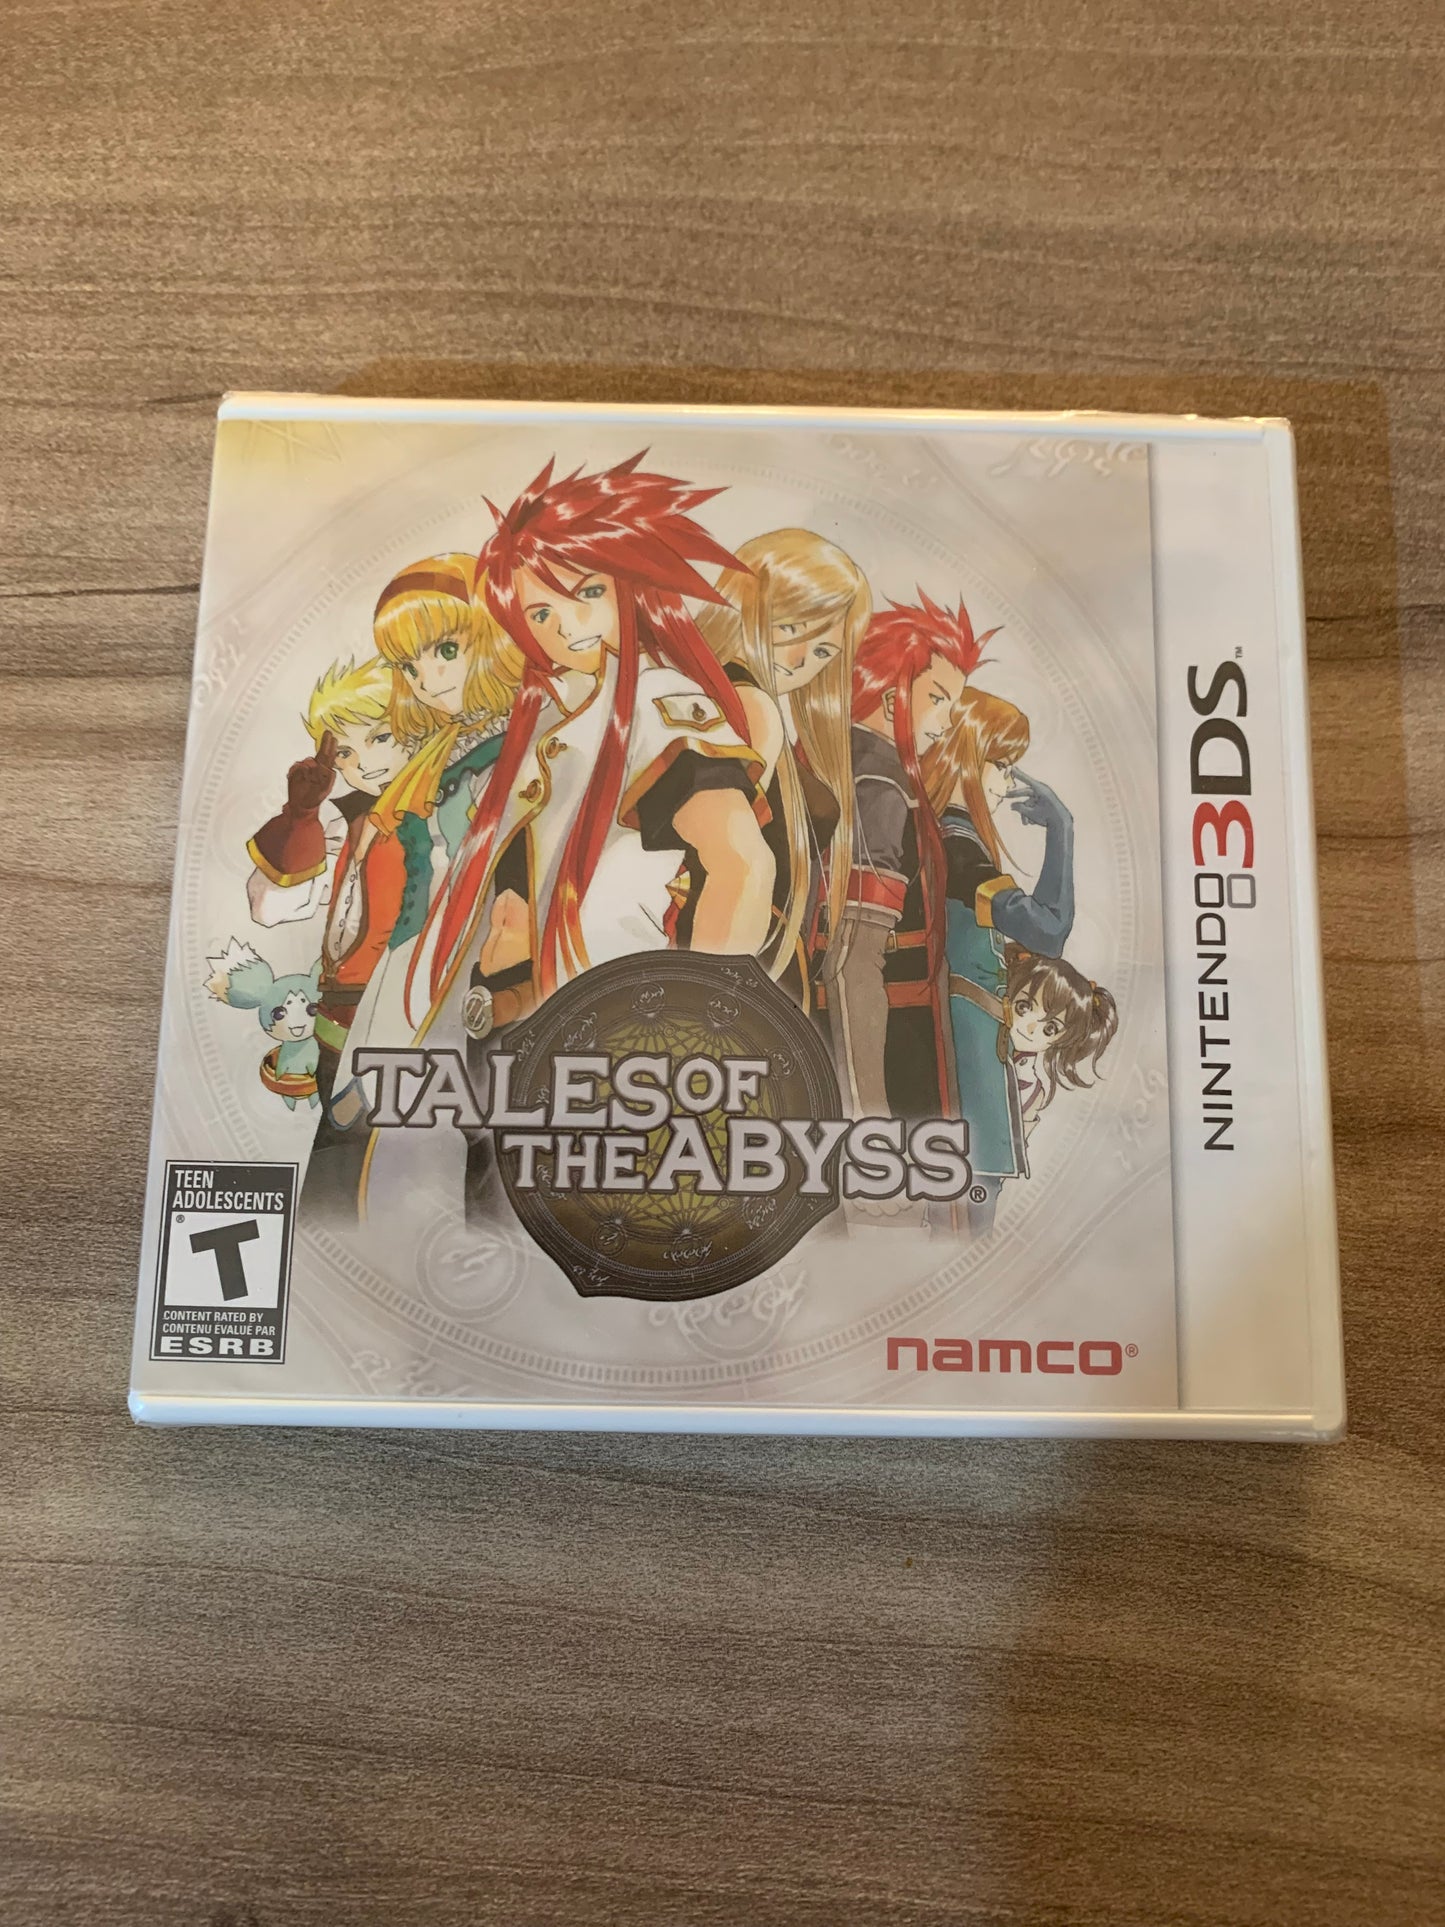 PiXEL-RETRO.COM : NINTENDO 3DS (3DS) TALES OF THE ABYSS COMPLETE CIB BOX MANUAL GAME NTSC BRAND NEW SEALED